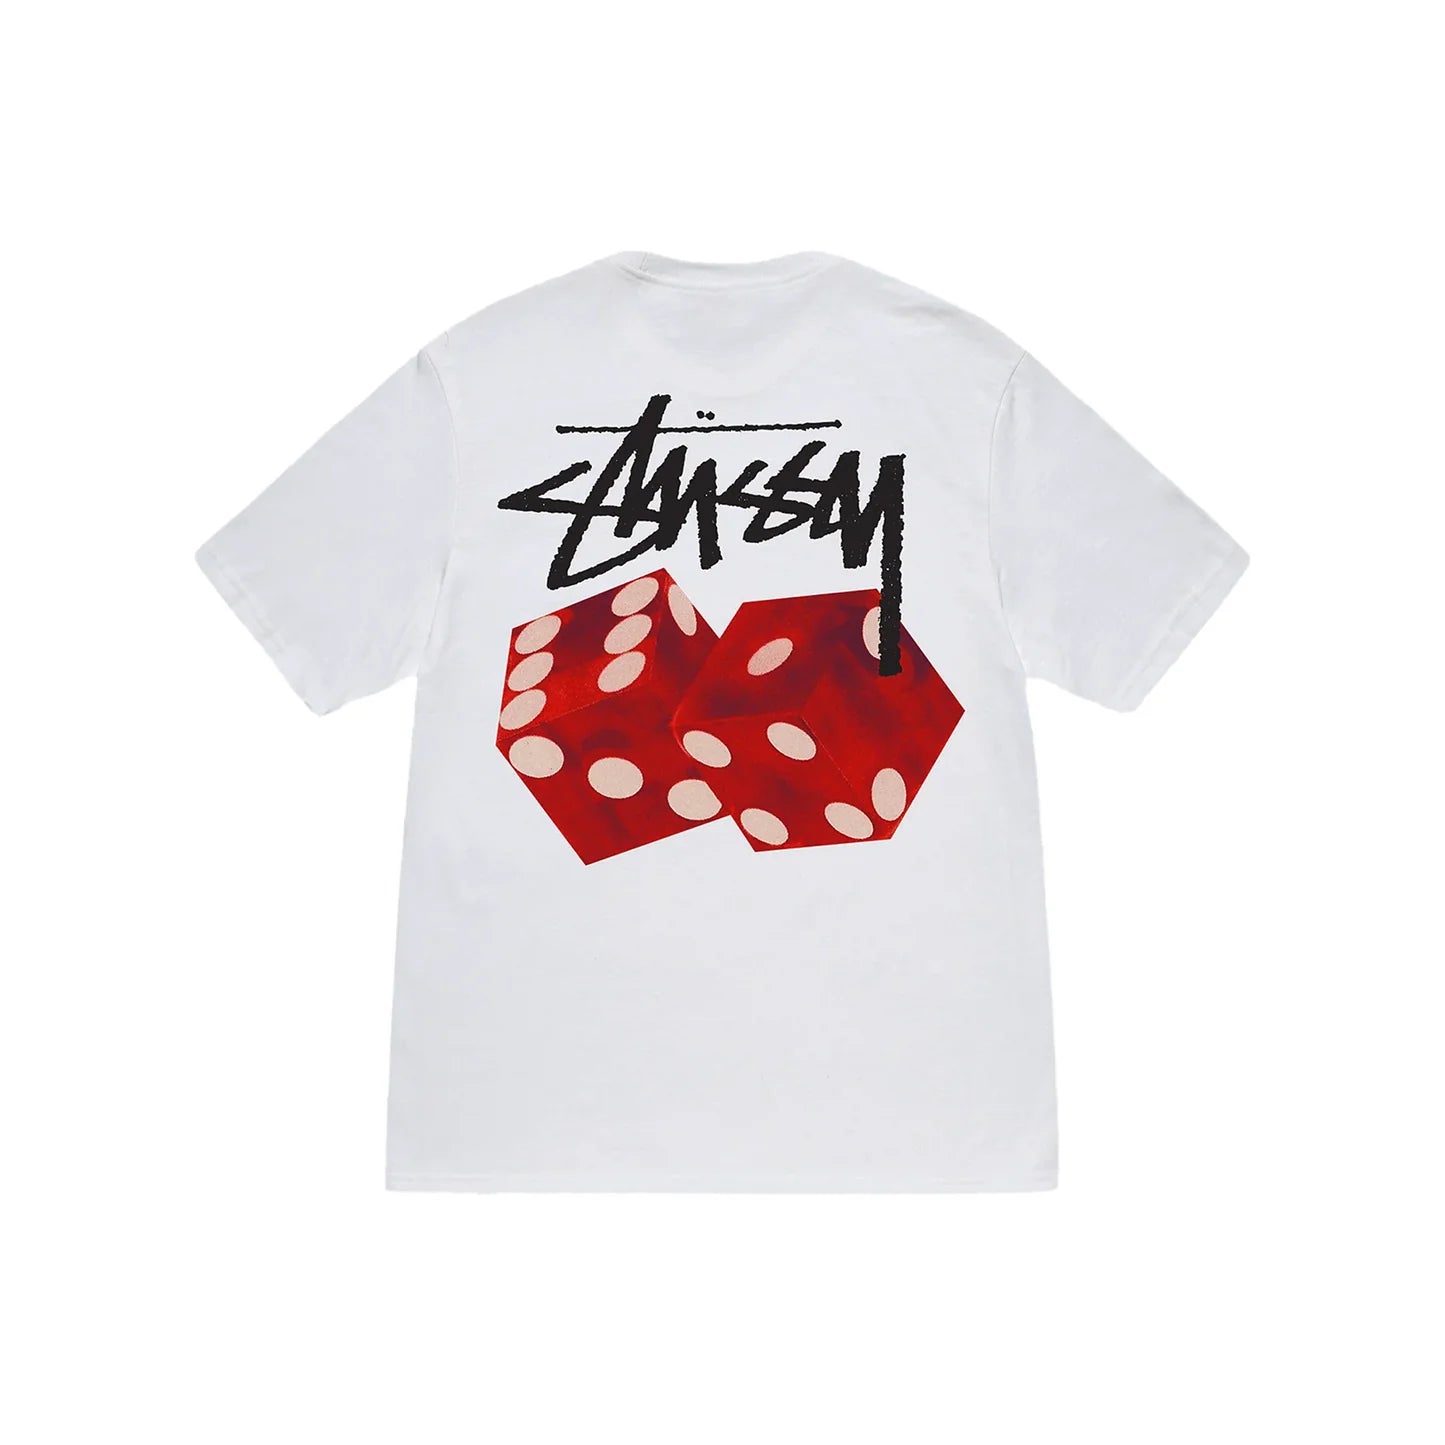 Stüssy Dicce out Tee White